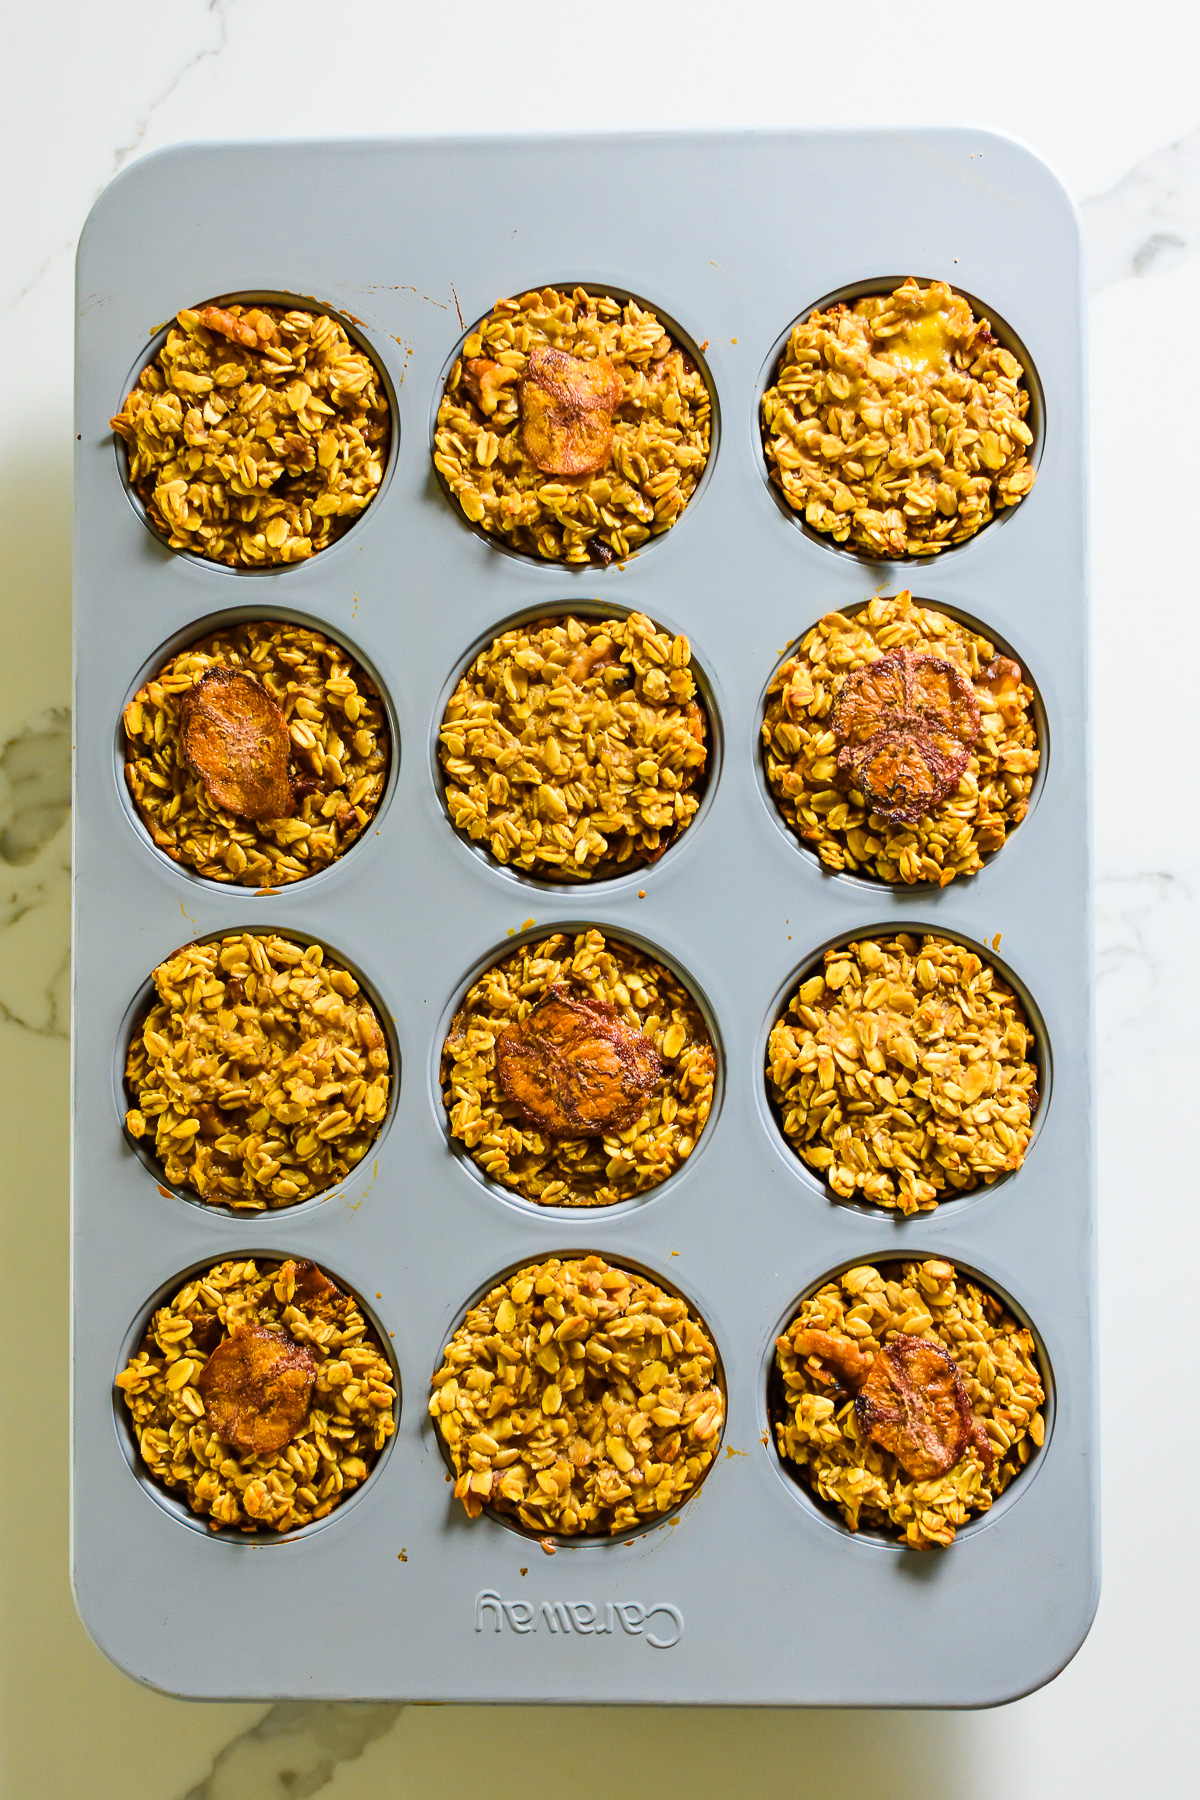 perfectly golden brown banana bread baked oatmeal cups in cupcake pan.